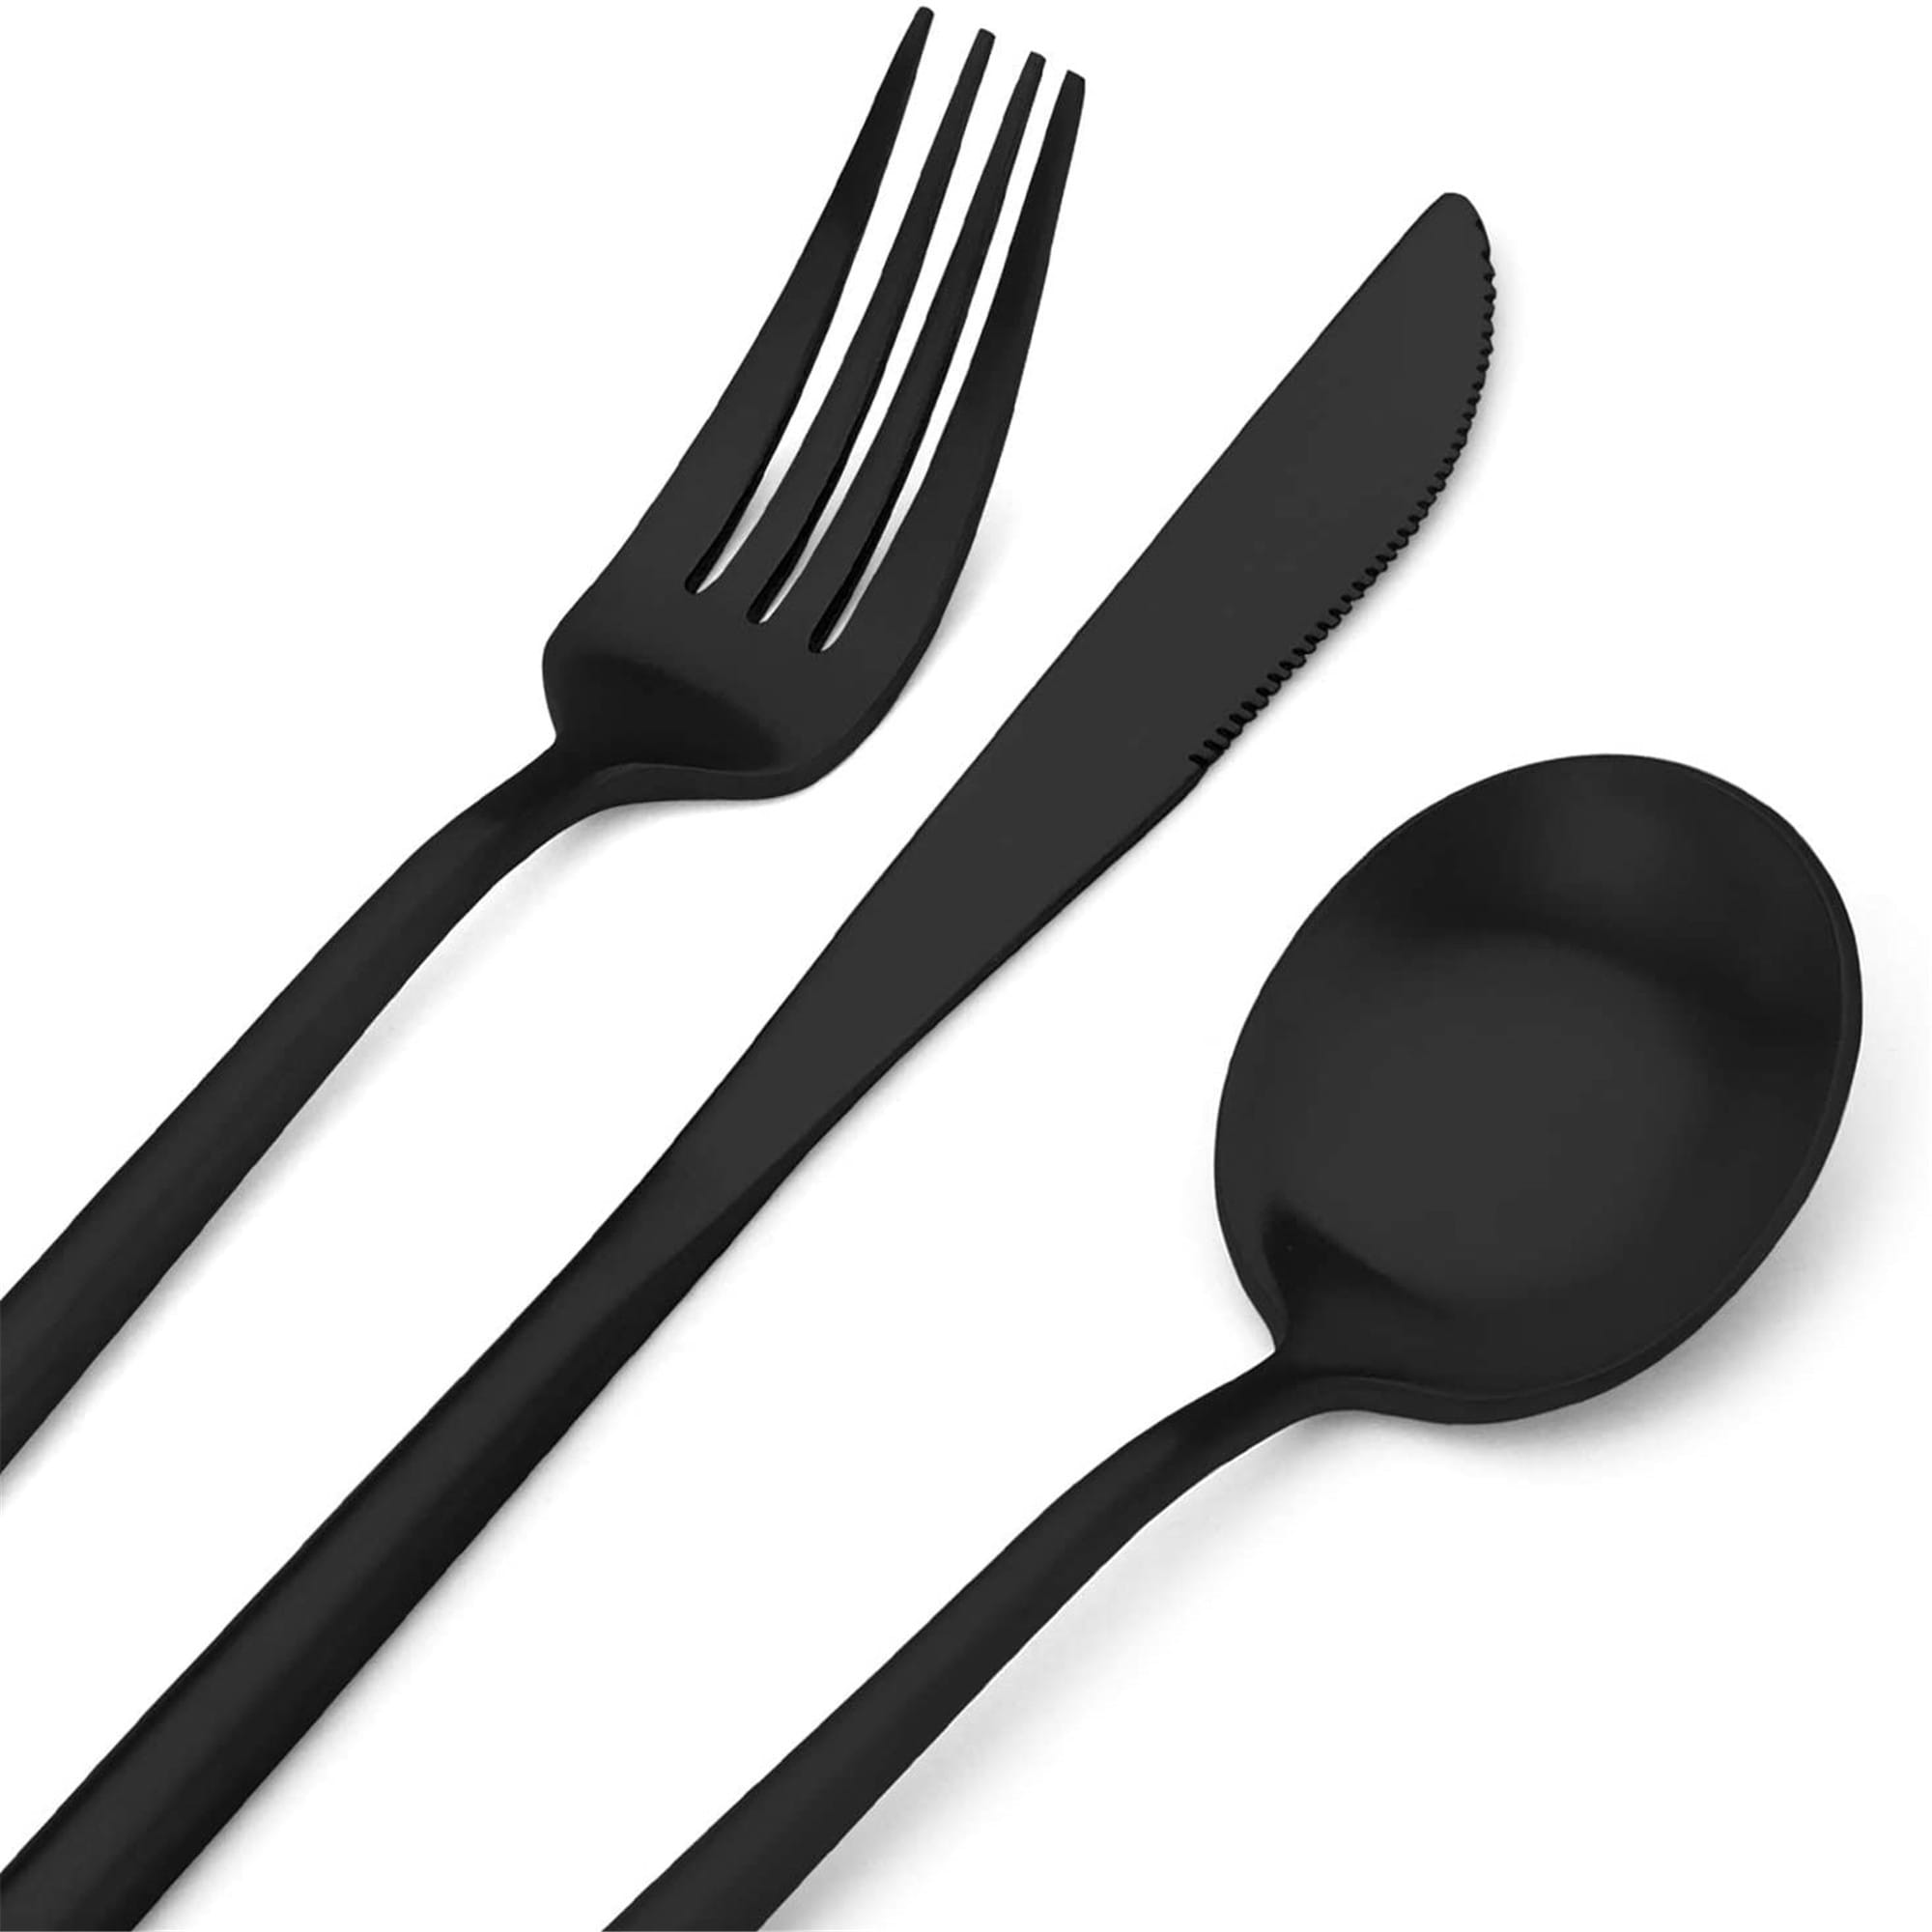 DEACORY Silverware Set Flatware Set Matte Black Cutlery Set Brushed  Finished Hexagon Handle Heavy Stainless Steel 20 Pieces Dishwasher Safe  Service